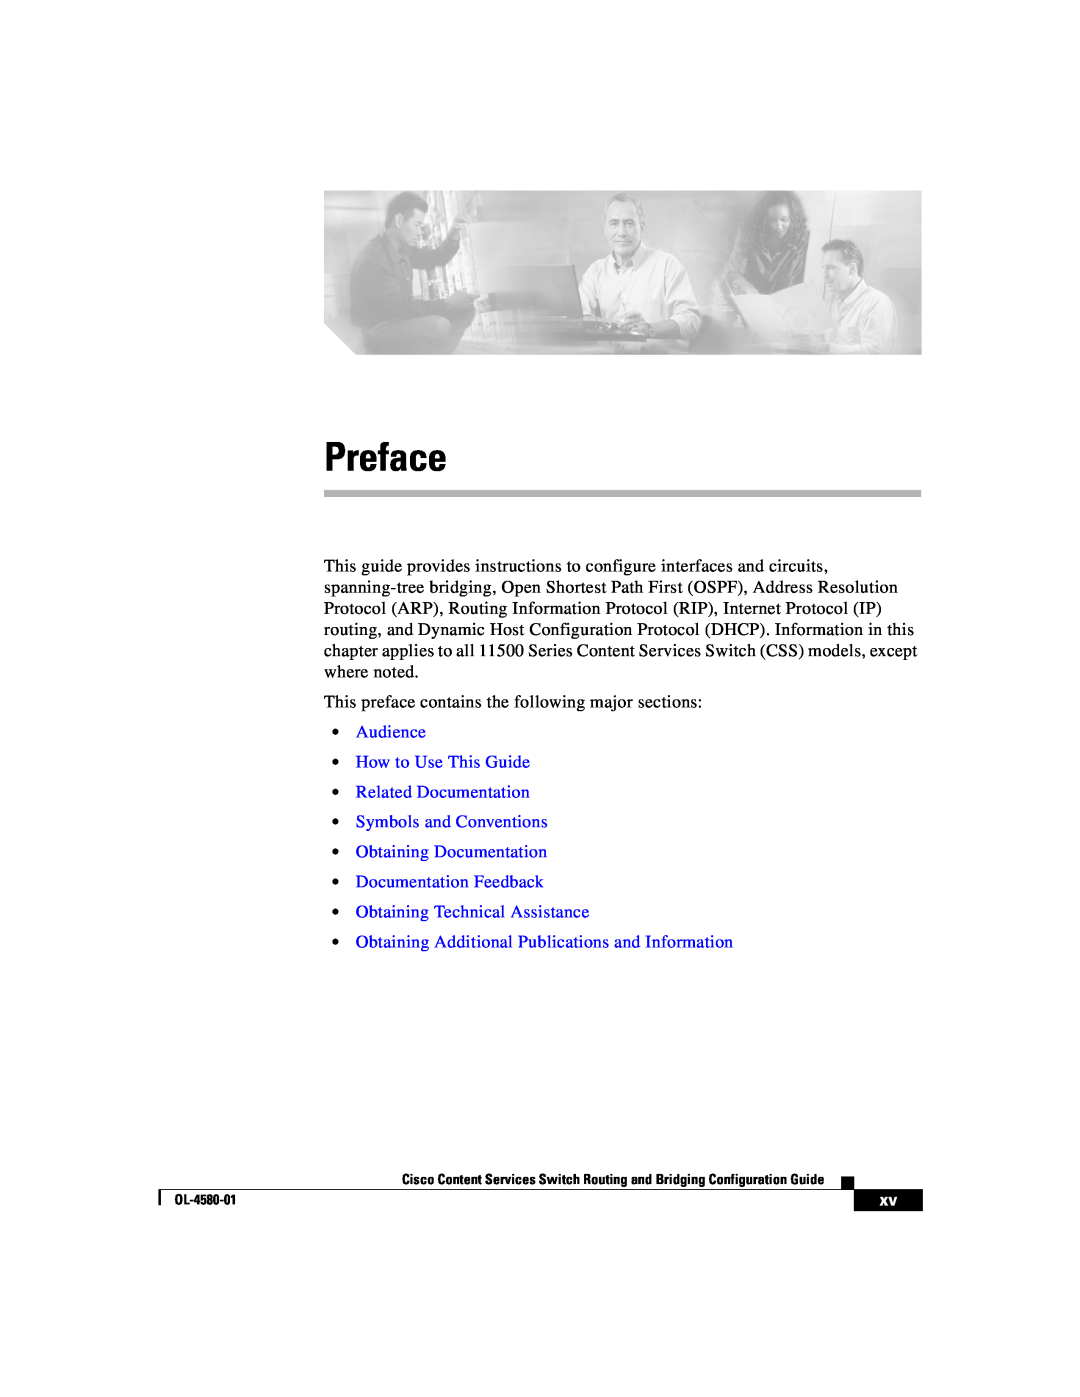 Cisco Systems OL-4580-01 manual Preface, Audience How to Use This Guide Related Documentation 